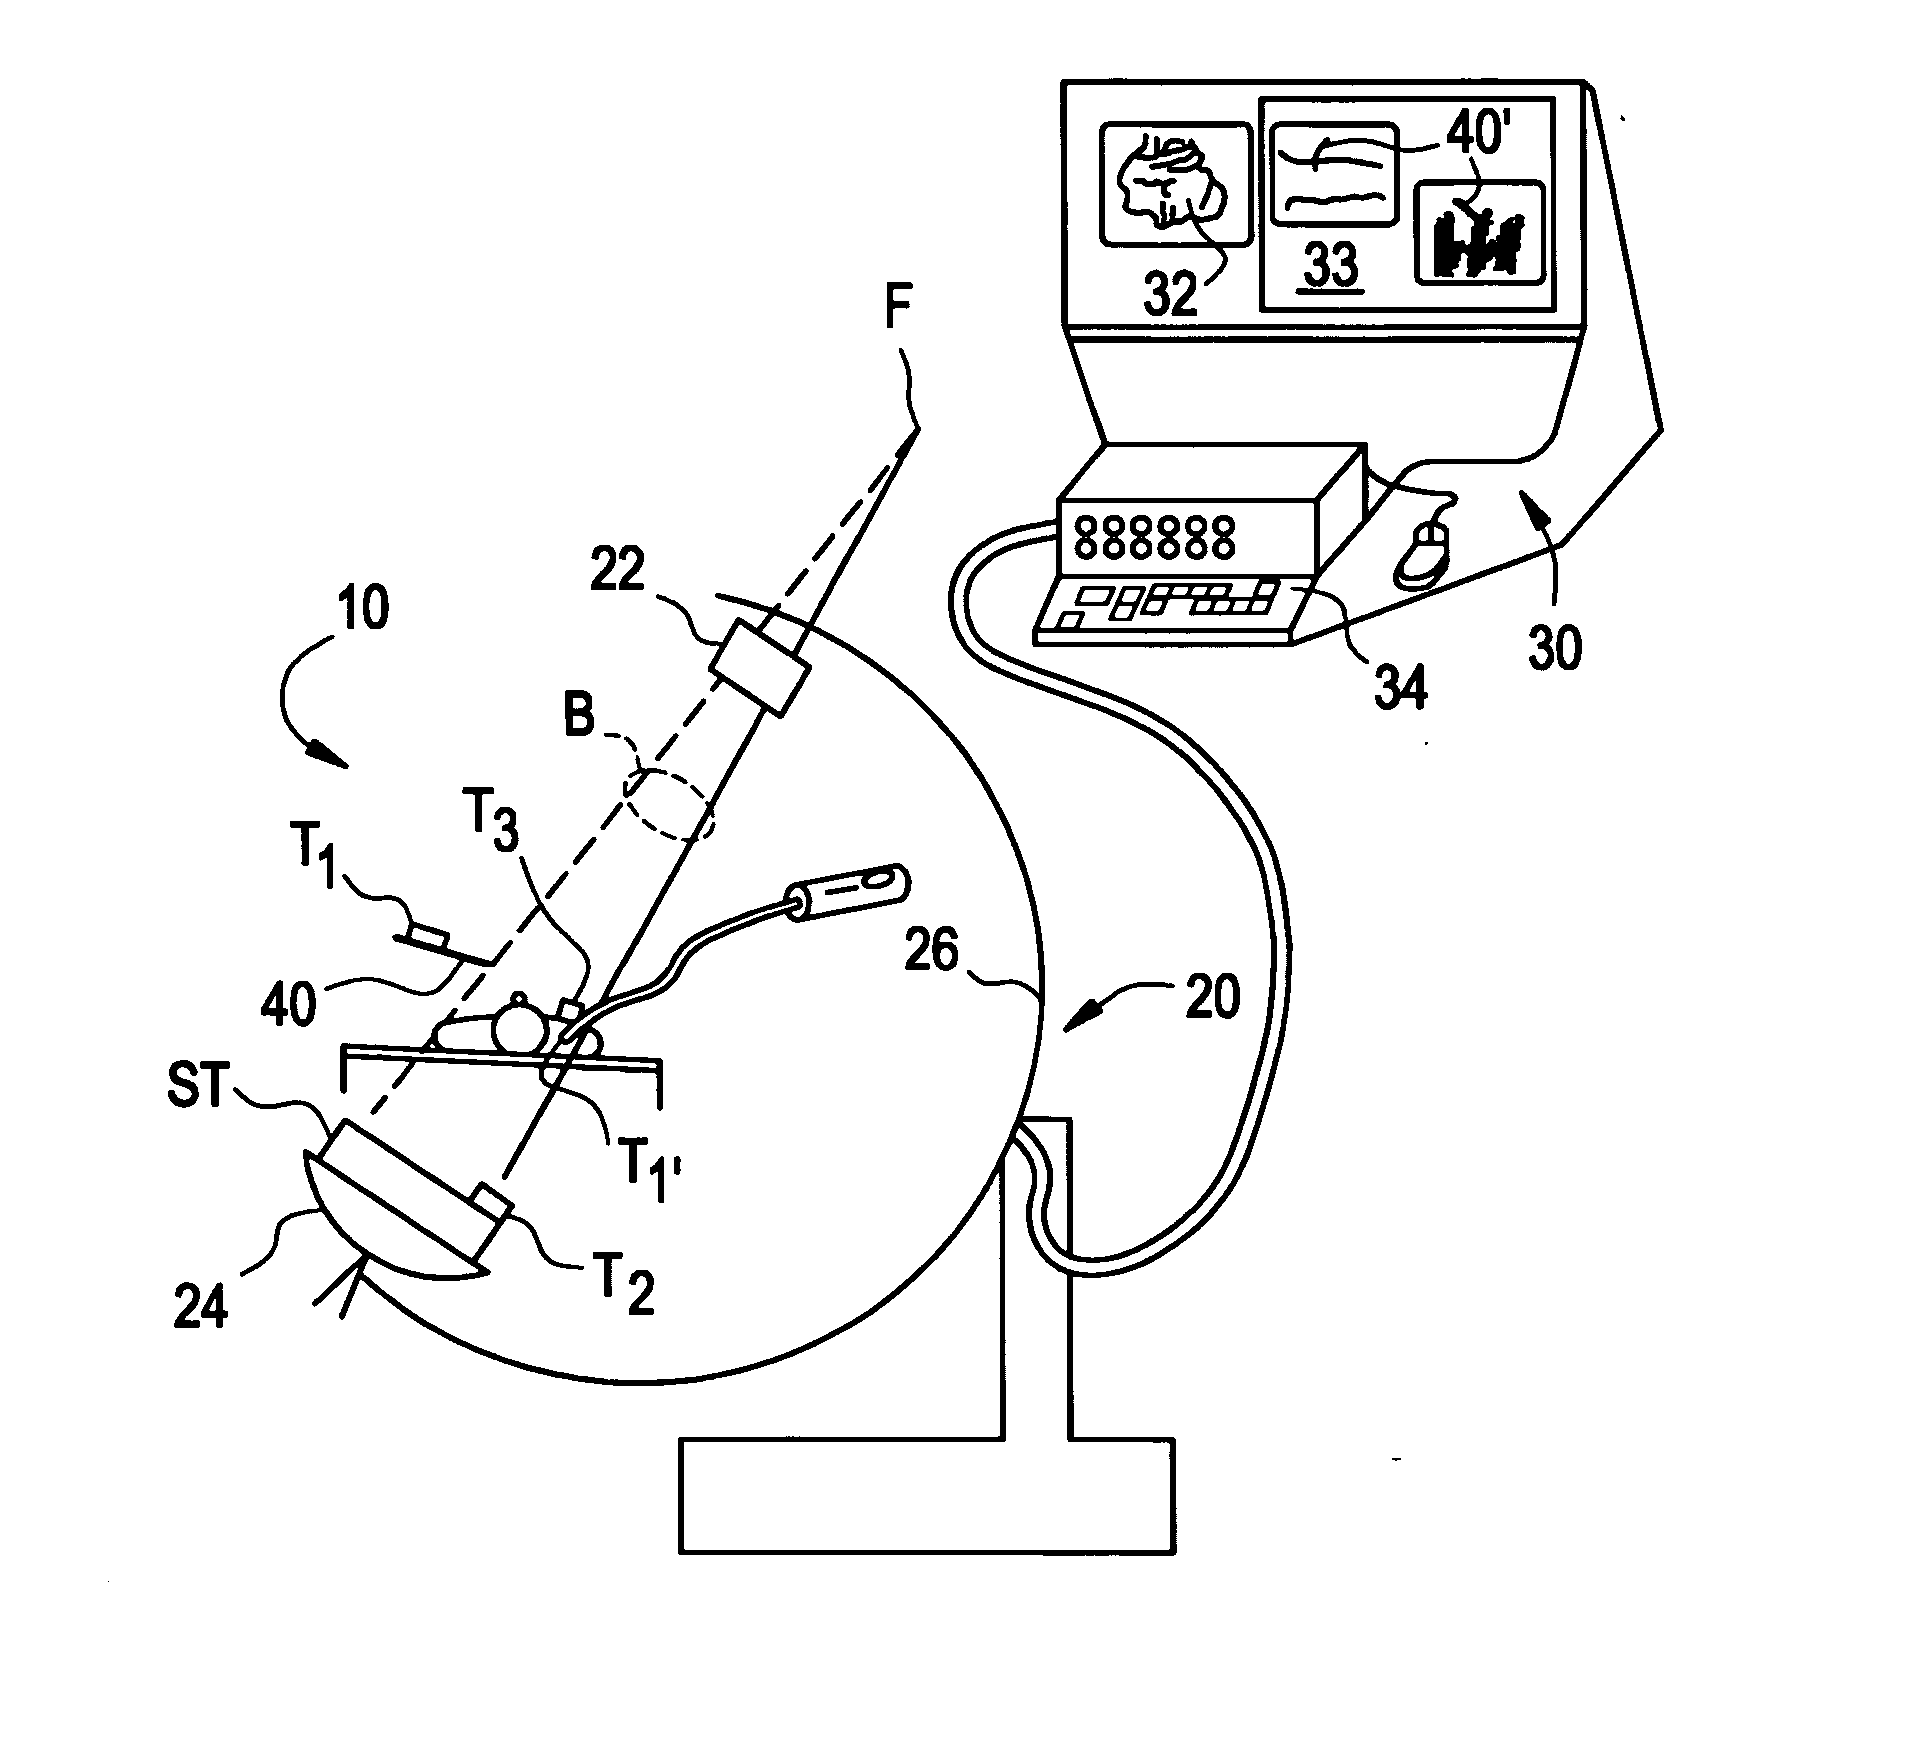 System and method for integration of a calibration target into a C-arm